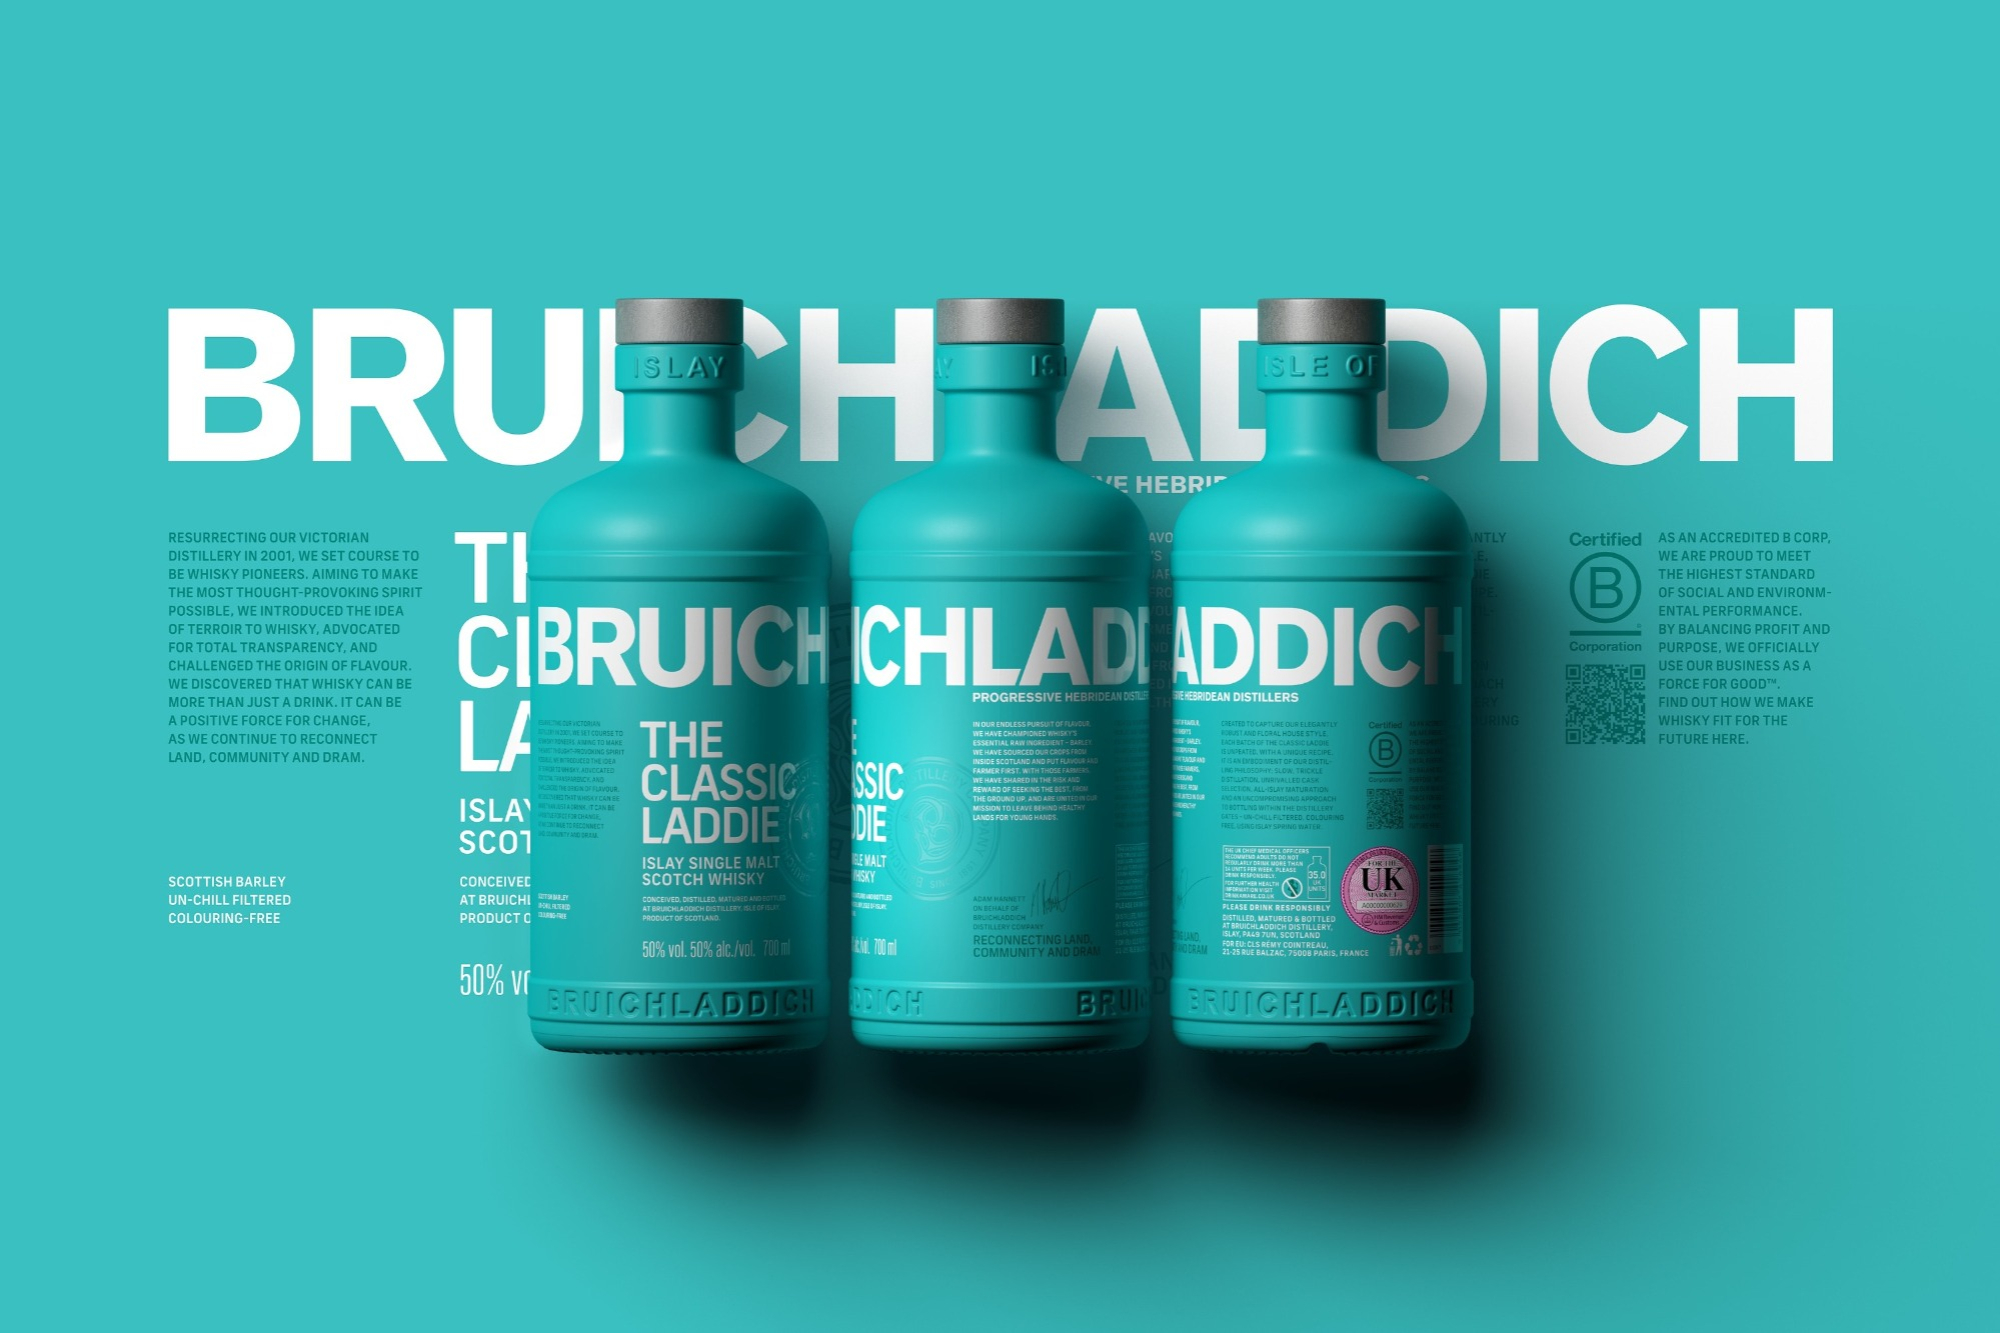 Thirst Builds a Beacon of Real Progress With Bruichladdich’s the Classic Laddie